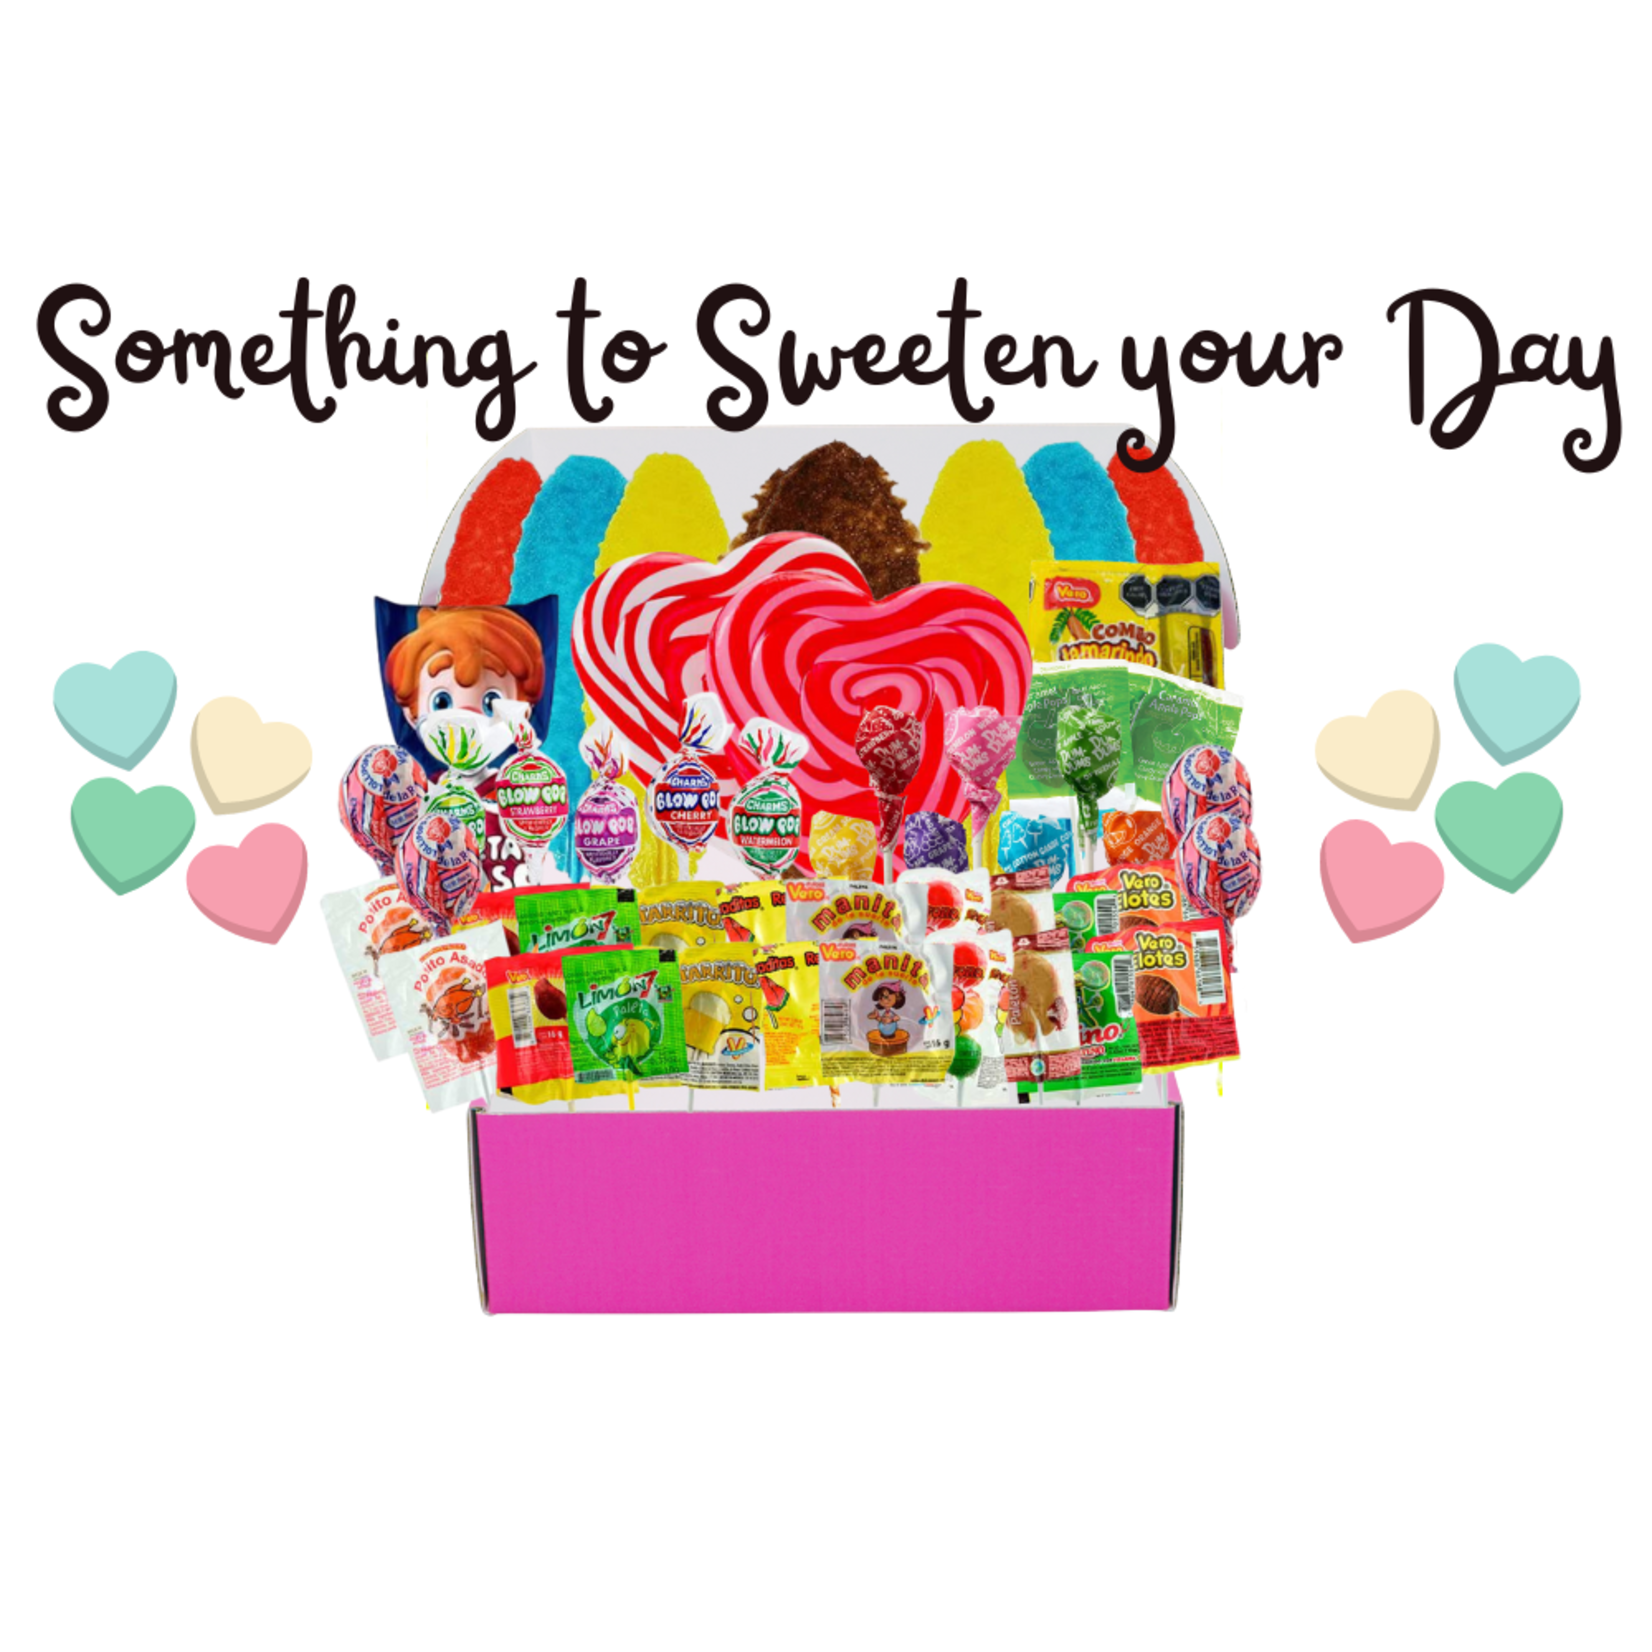 Something to Sweeten your day -Sweet Candy Mix Gift Box